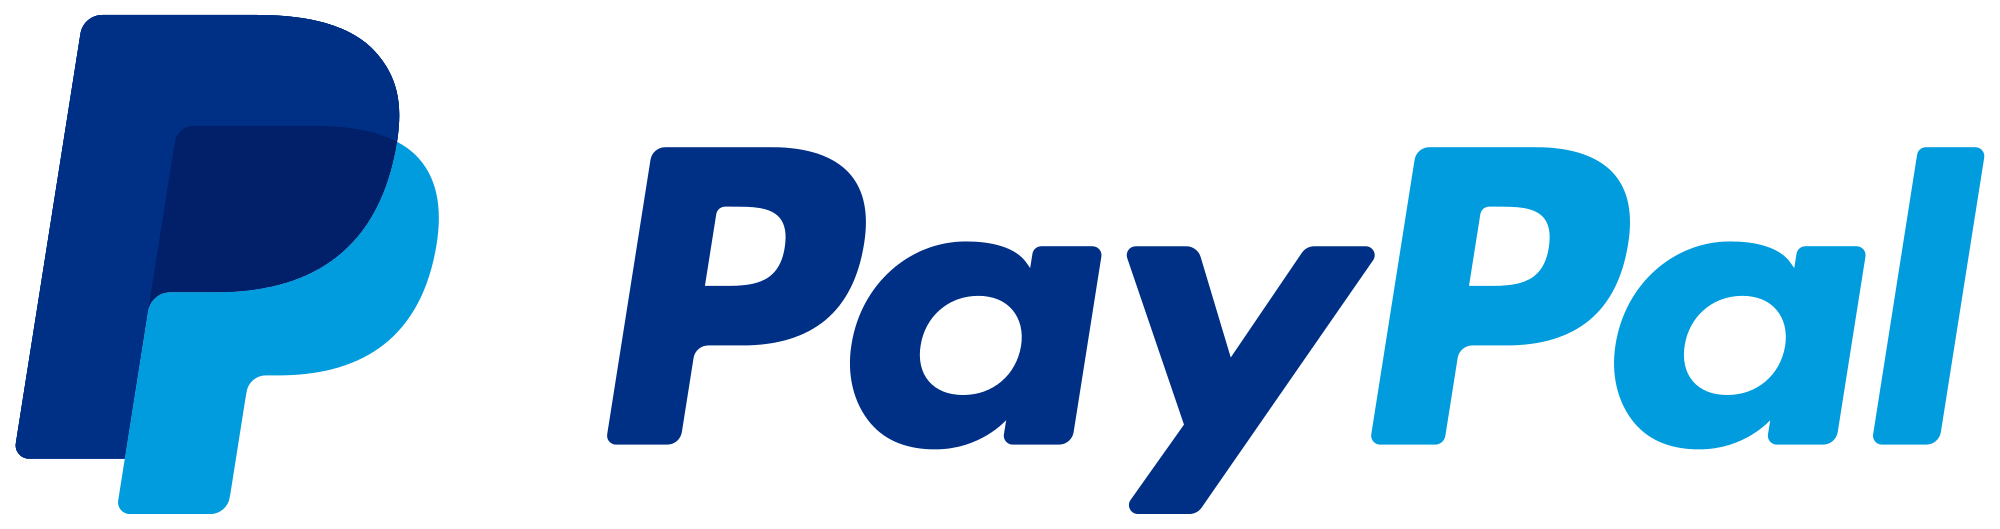 icone paypal